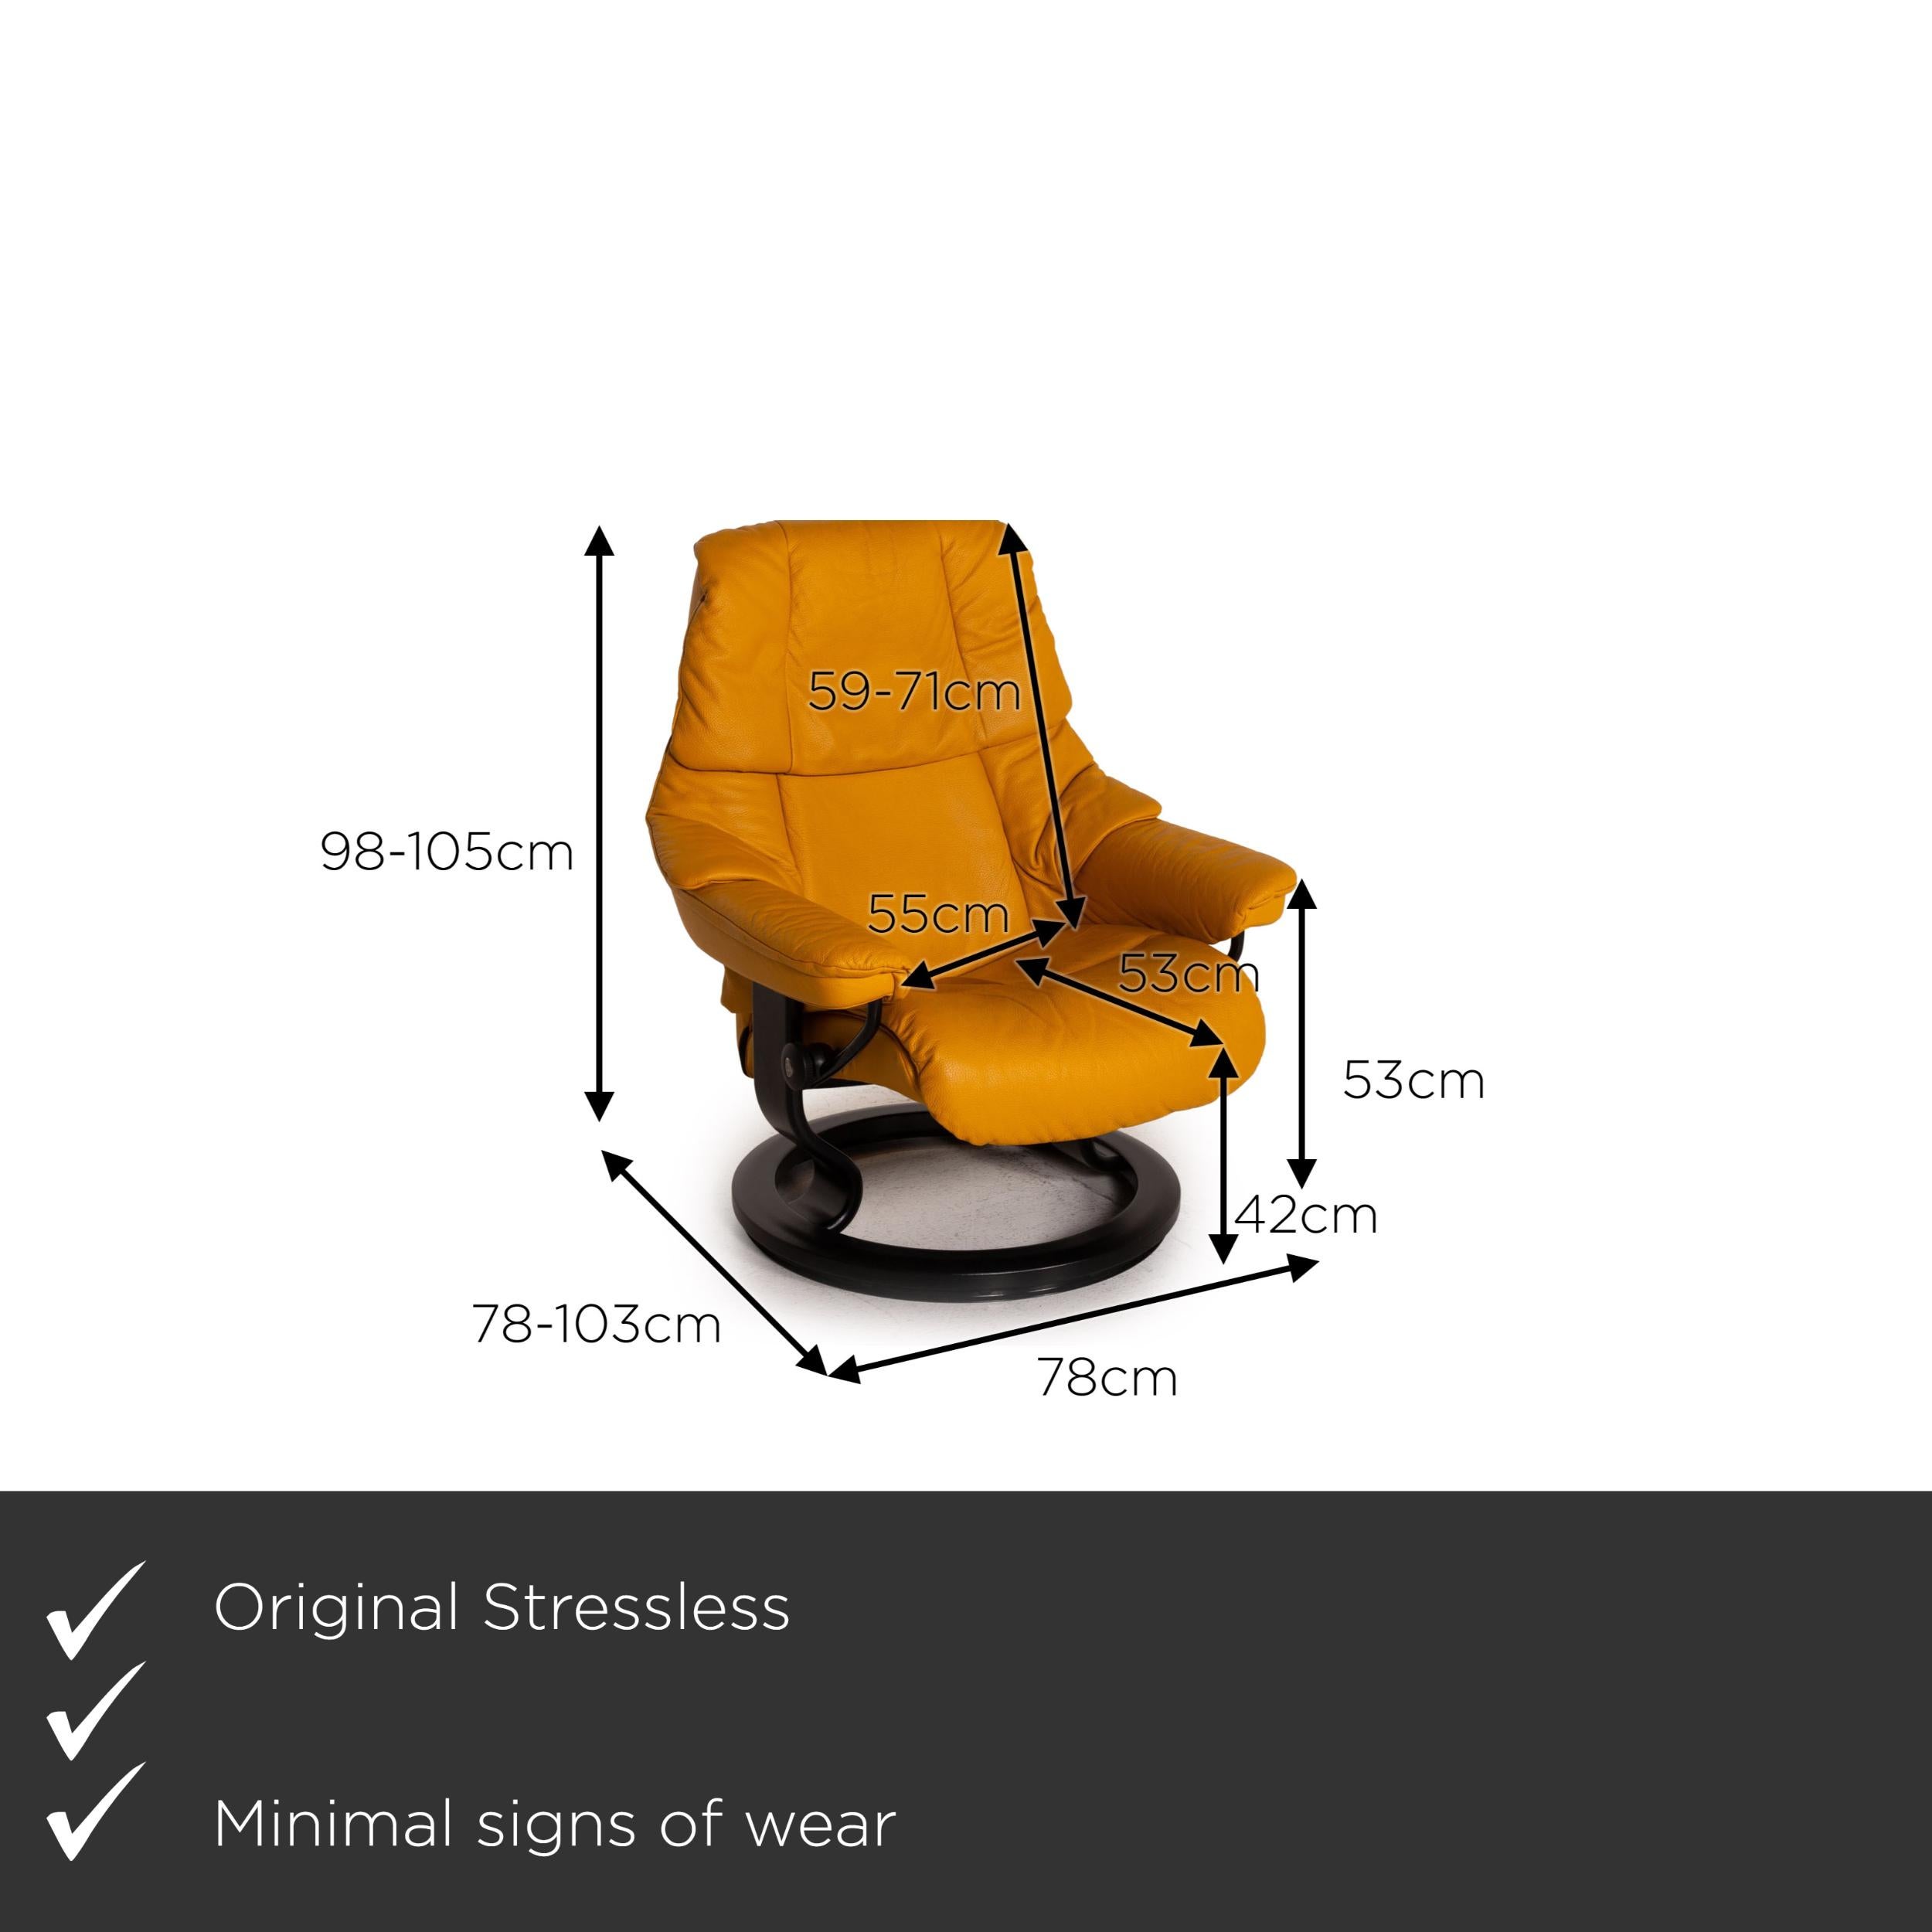 We present to you a Stressless Reno leather recliner yellow armchair.


 Product measurements in centimeters:
 

Depth: 78
Width: 78
Height: 98
Seat height: 42
Rest height: 53
Seat depth: 53
Seat width: 55
Back height: 59.
  